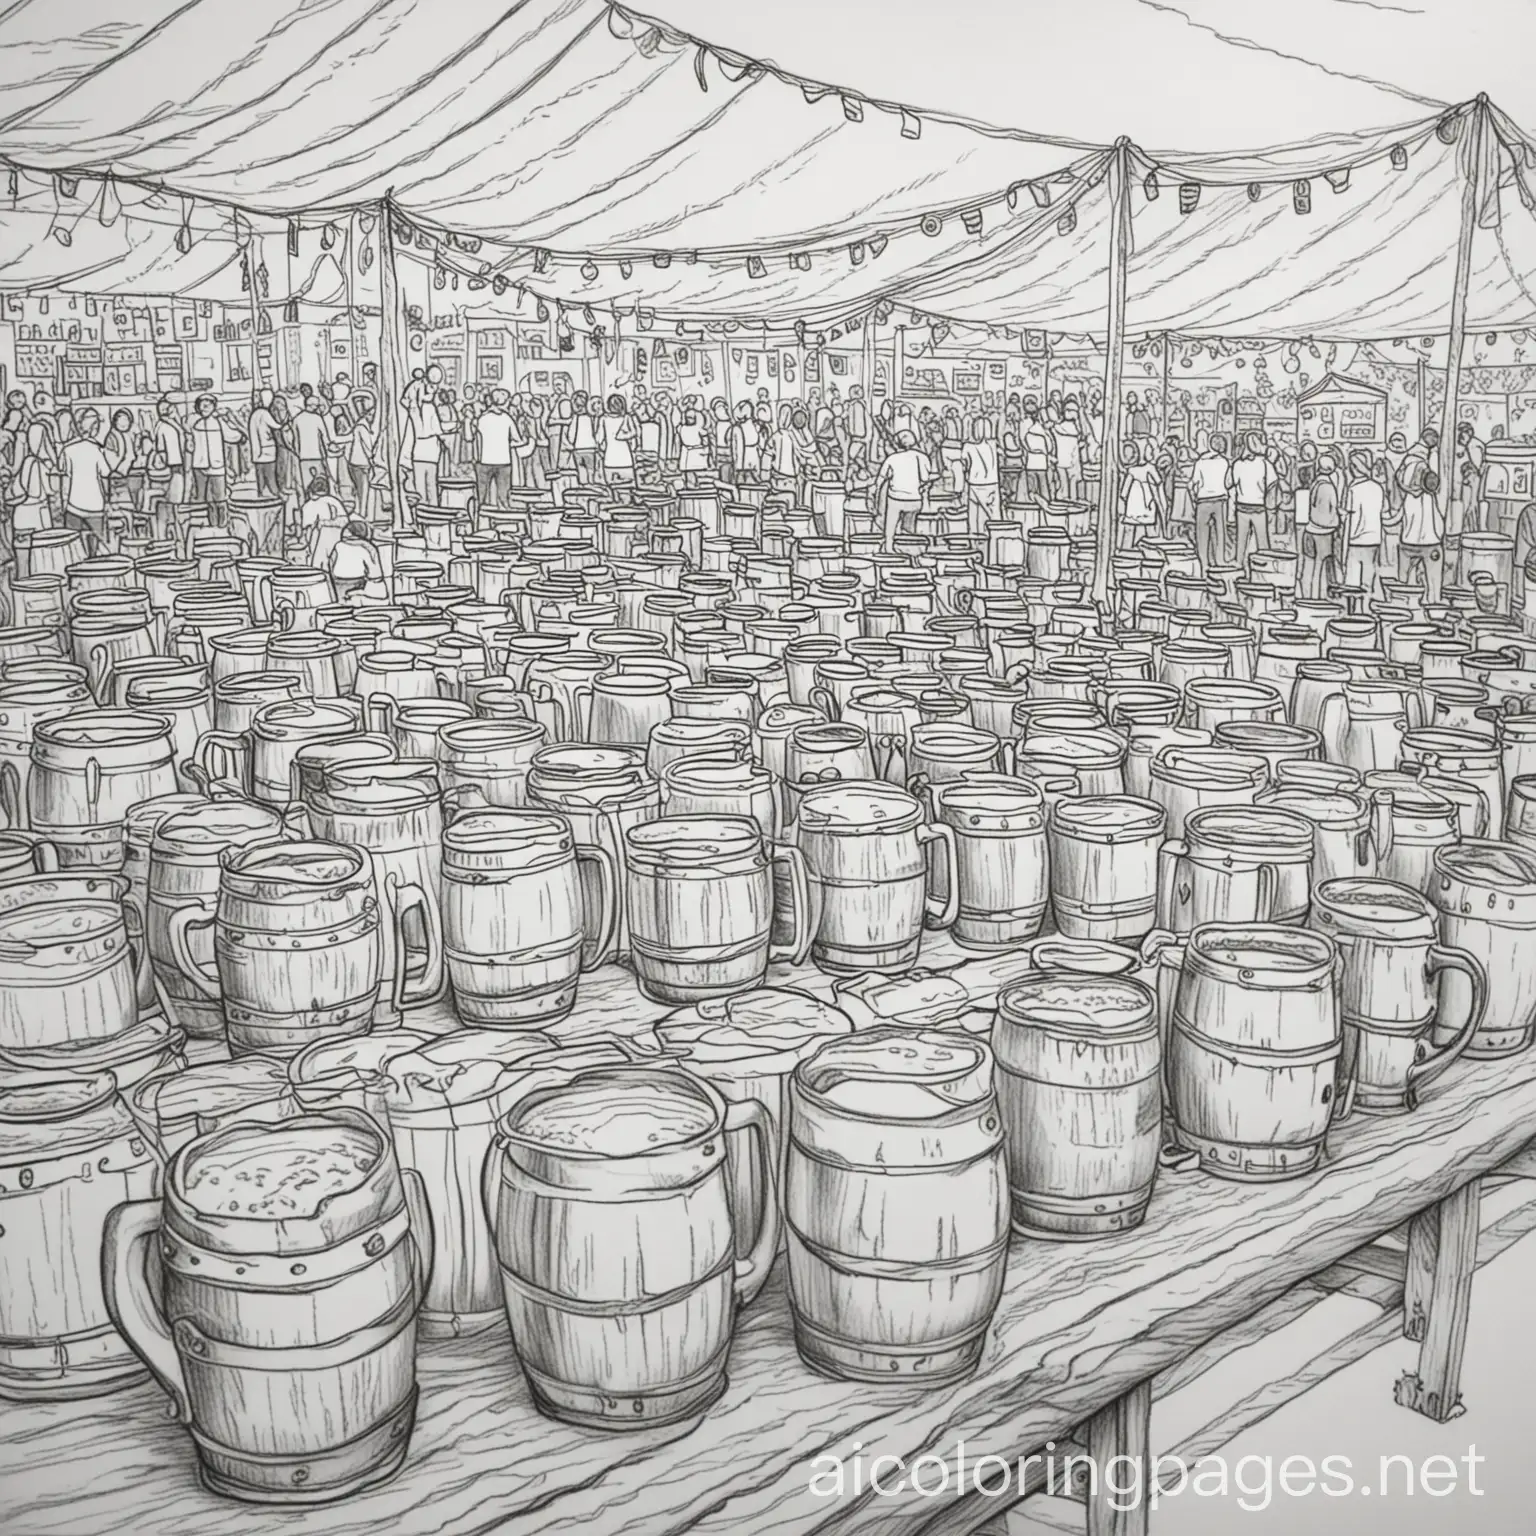 Beer-Festival-Scene-with-Colorful-Tents-and-Beer-Mugs